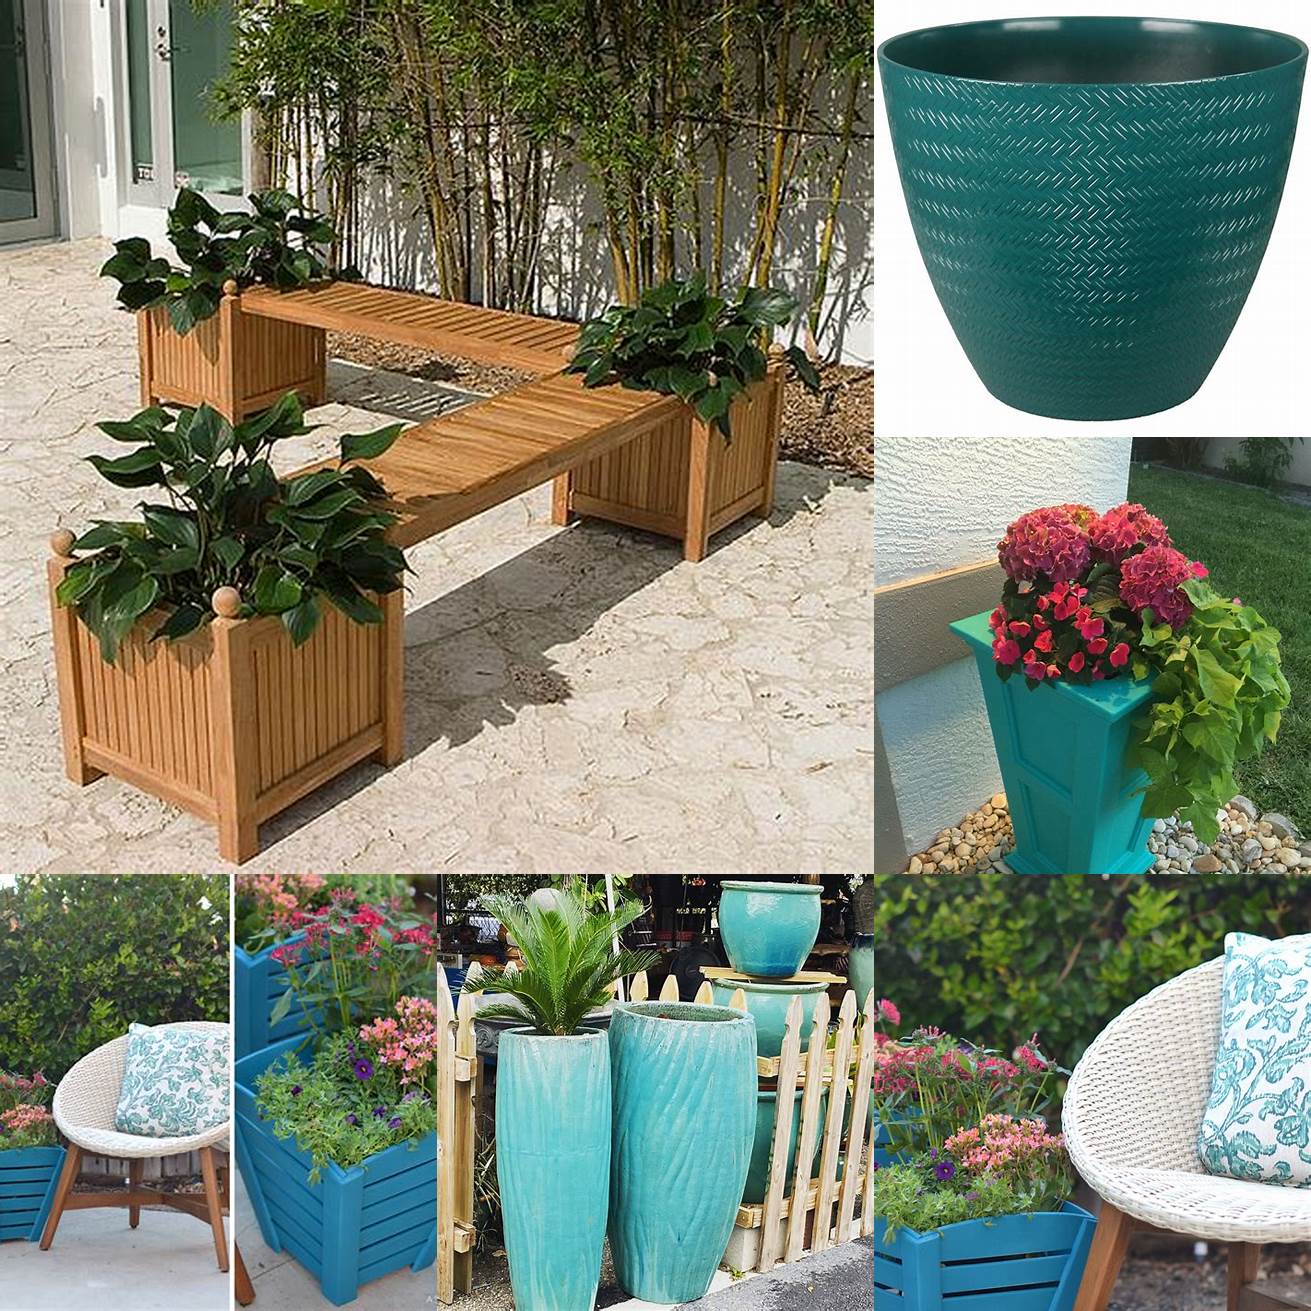 Teal planter boxes